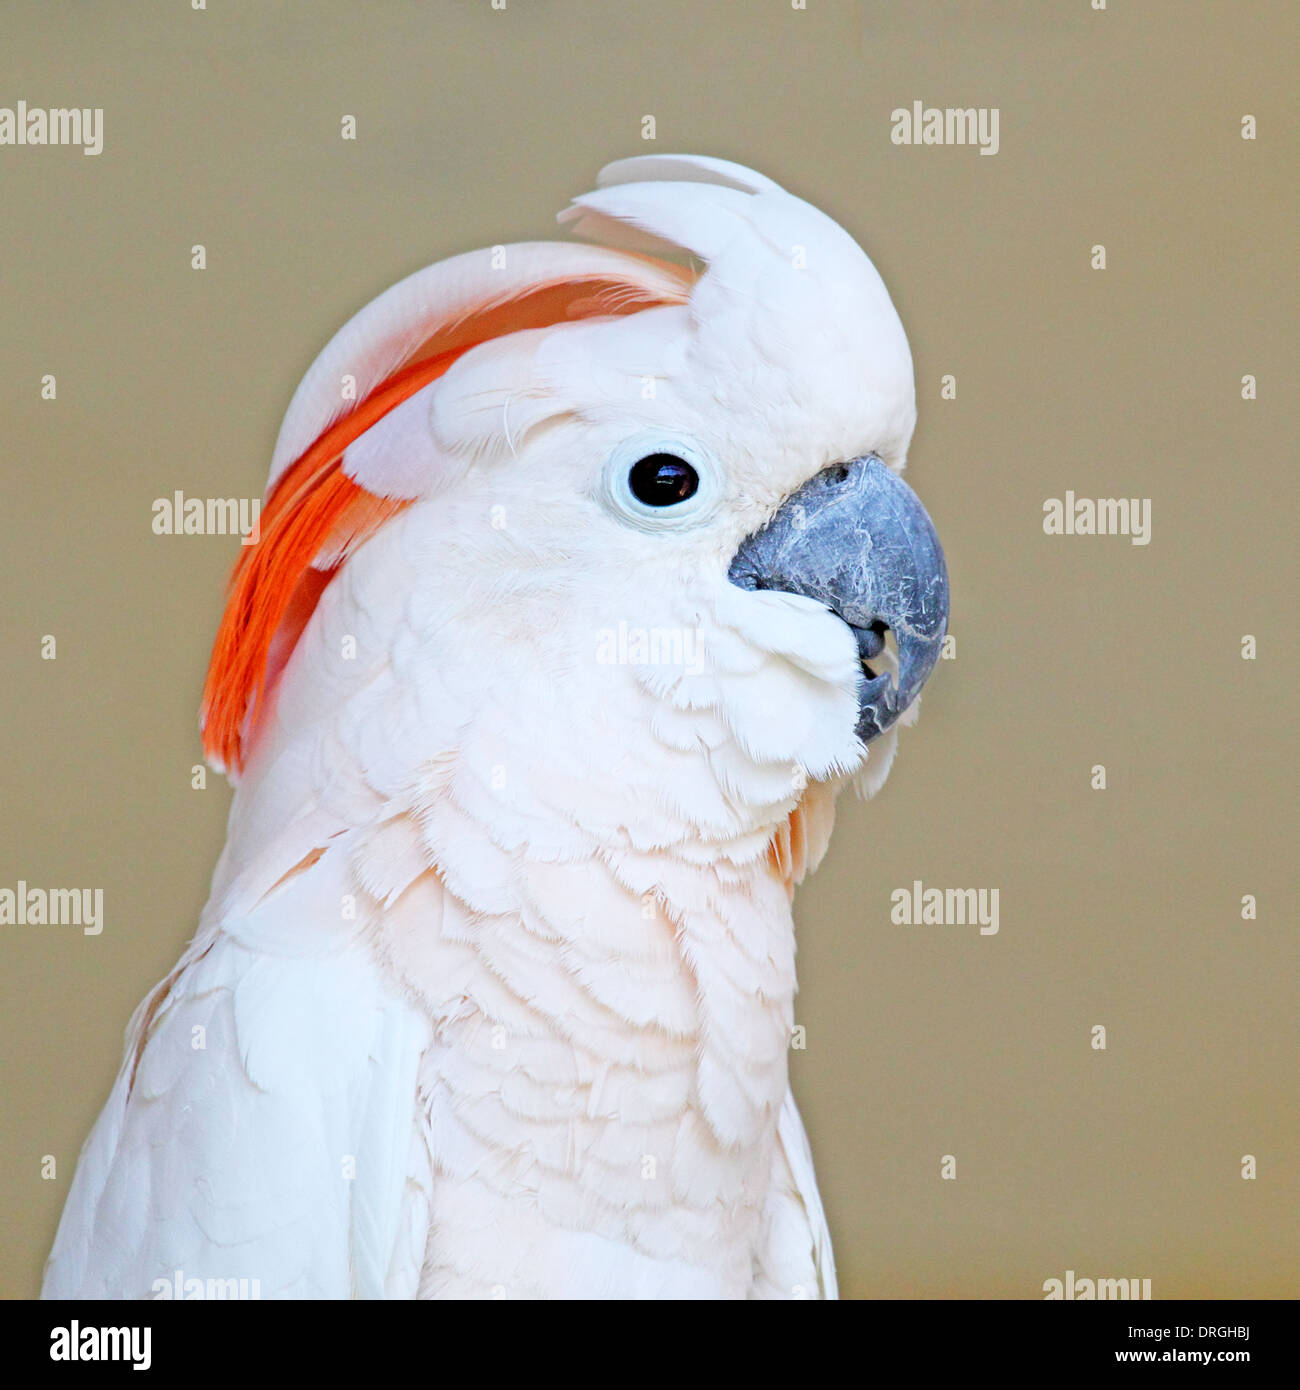 Portrait of a Moluccan Cockatoo (Cacatua moluccensis), or Salmon-crested Cockatoo, with uniform brown background Stock Photo